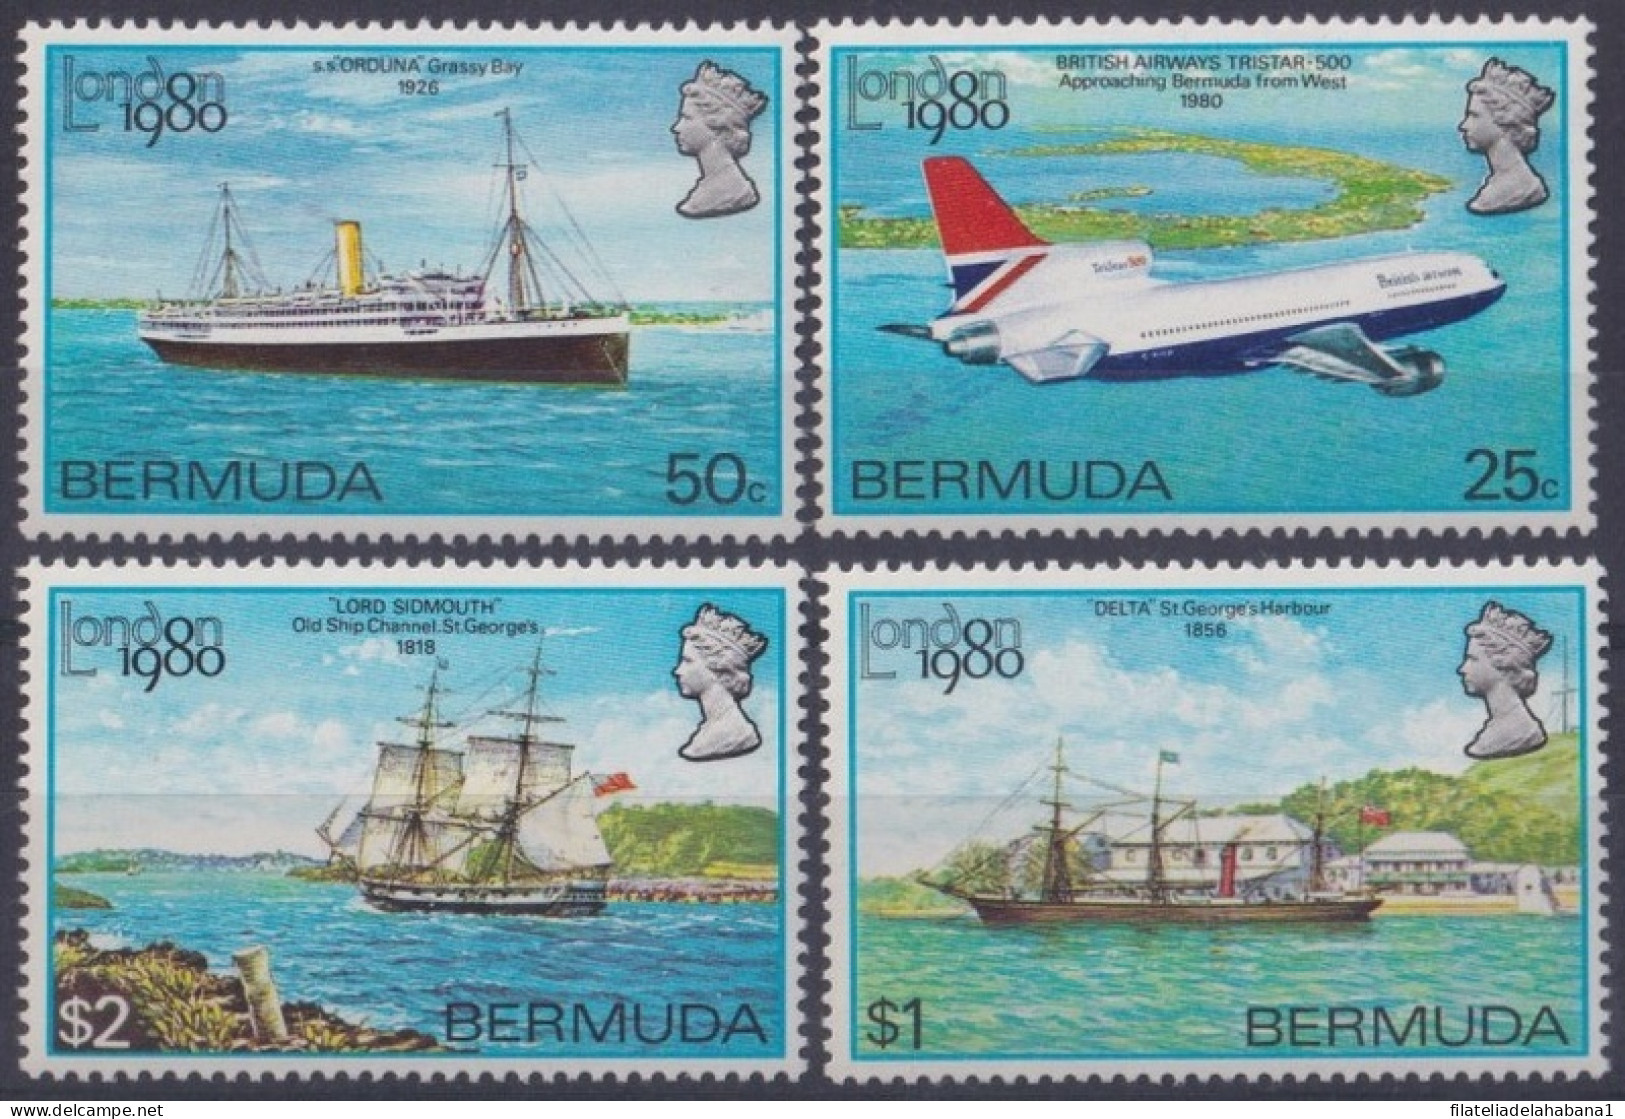 F-EX49865 BERMUDA IS MNH 1980 LONDON EXPO AIRPLANE SHIP BARCOS BOAT.  - Schiffe